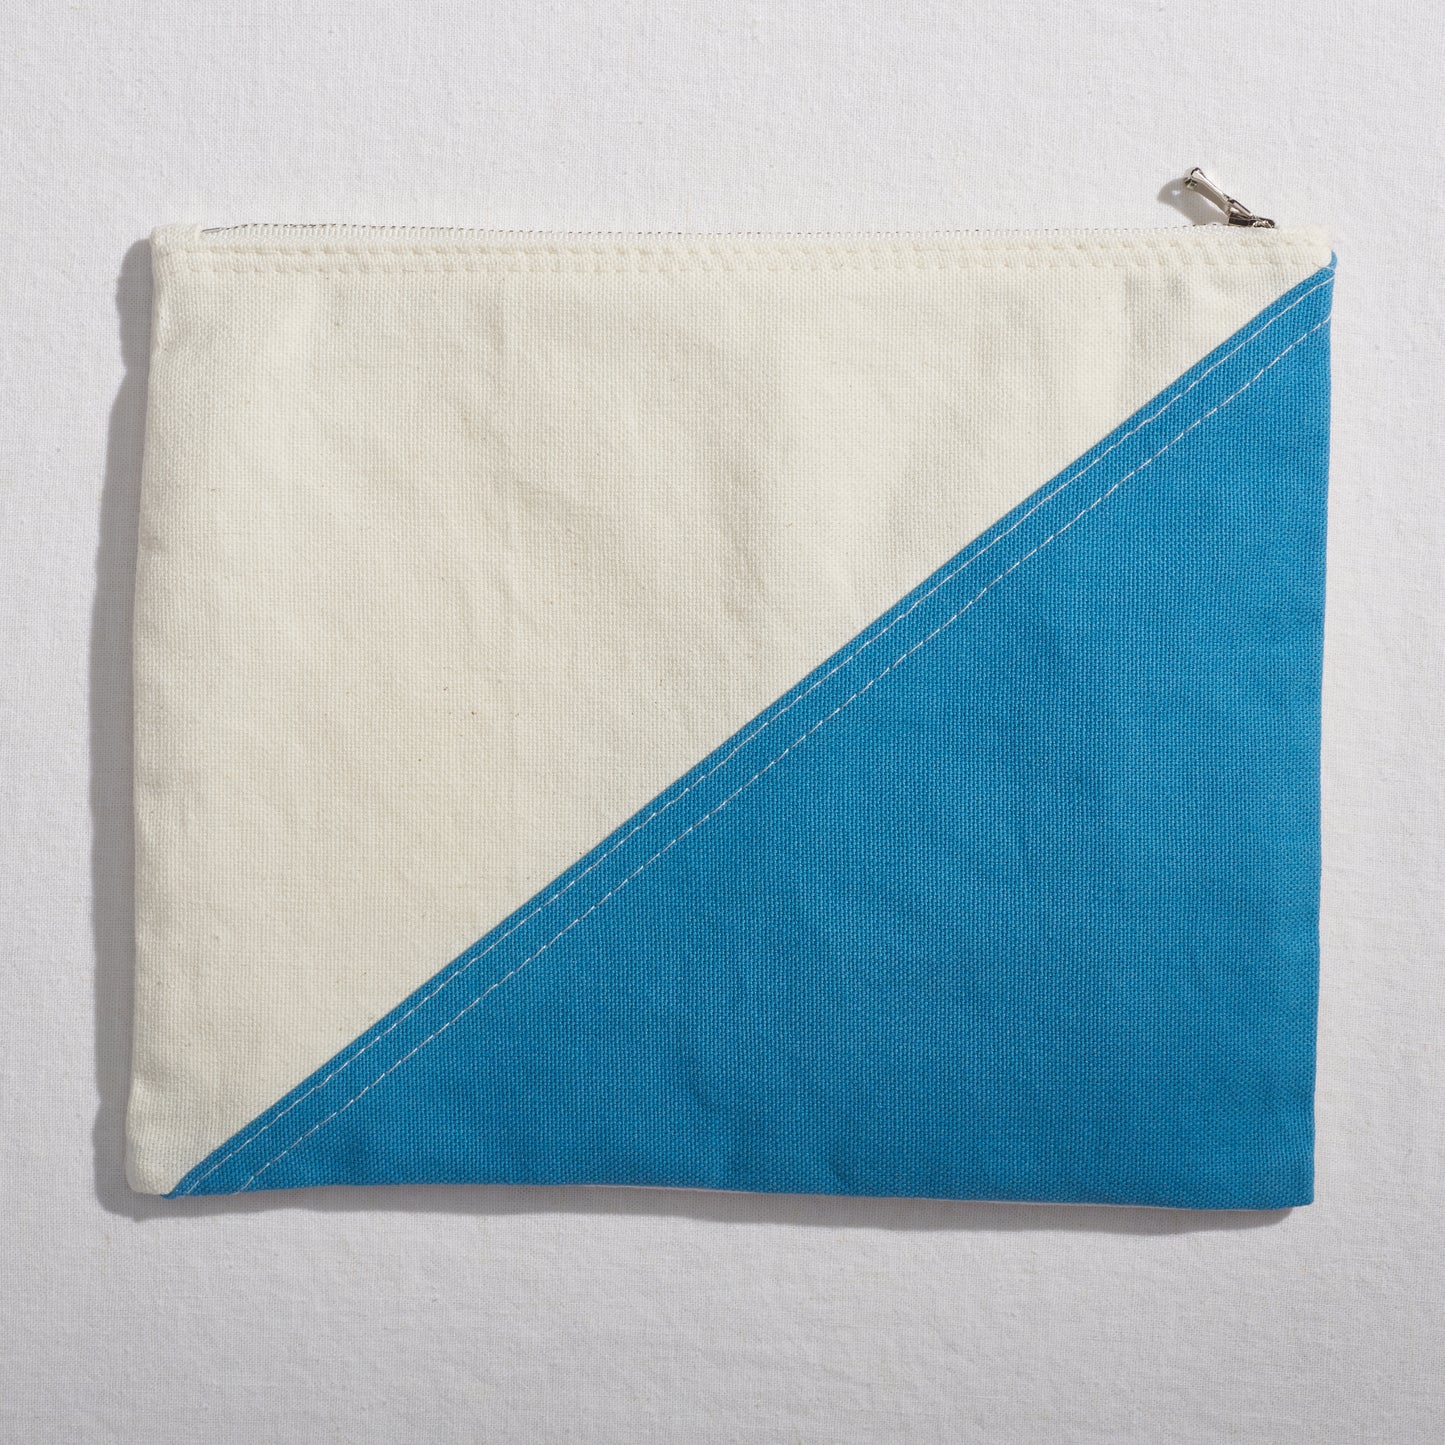 Re:Canvas "Threes" Pouch in Hesse